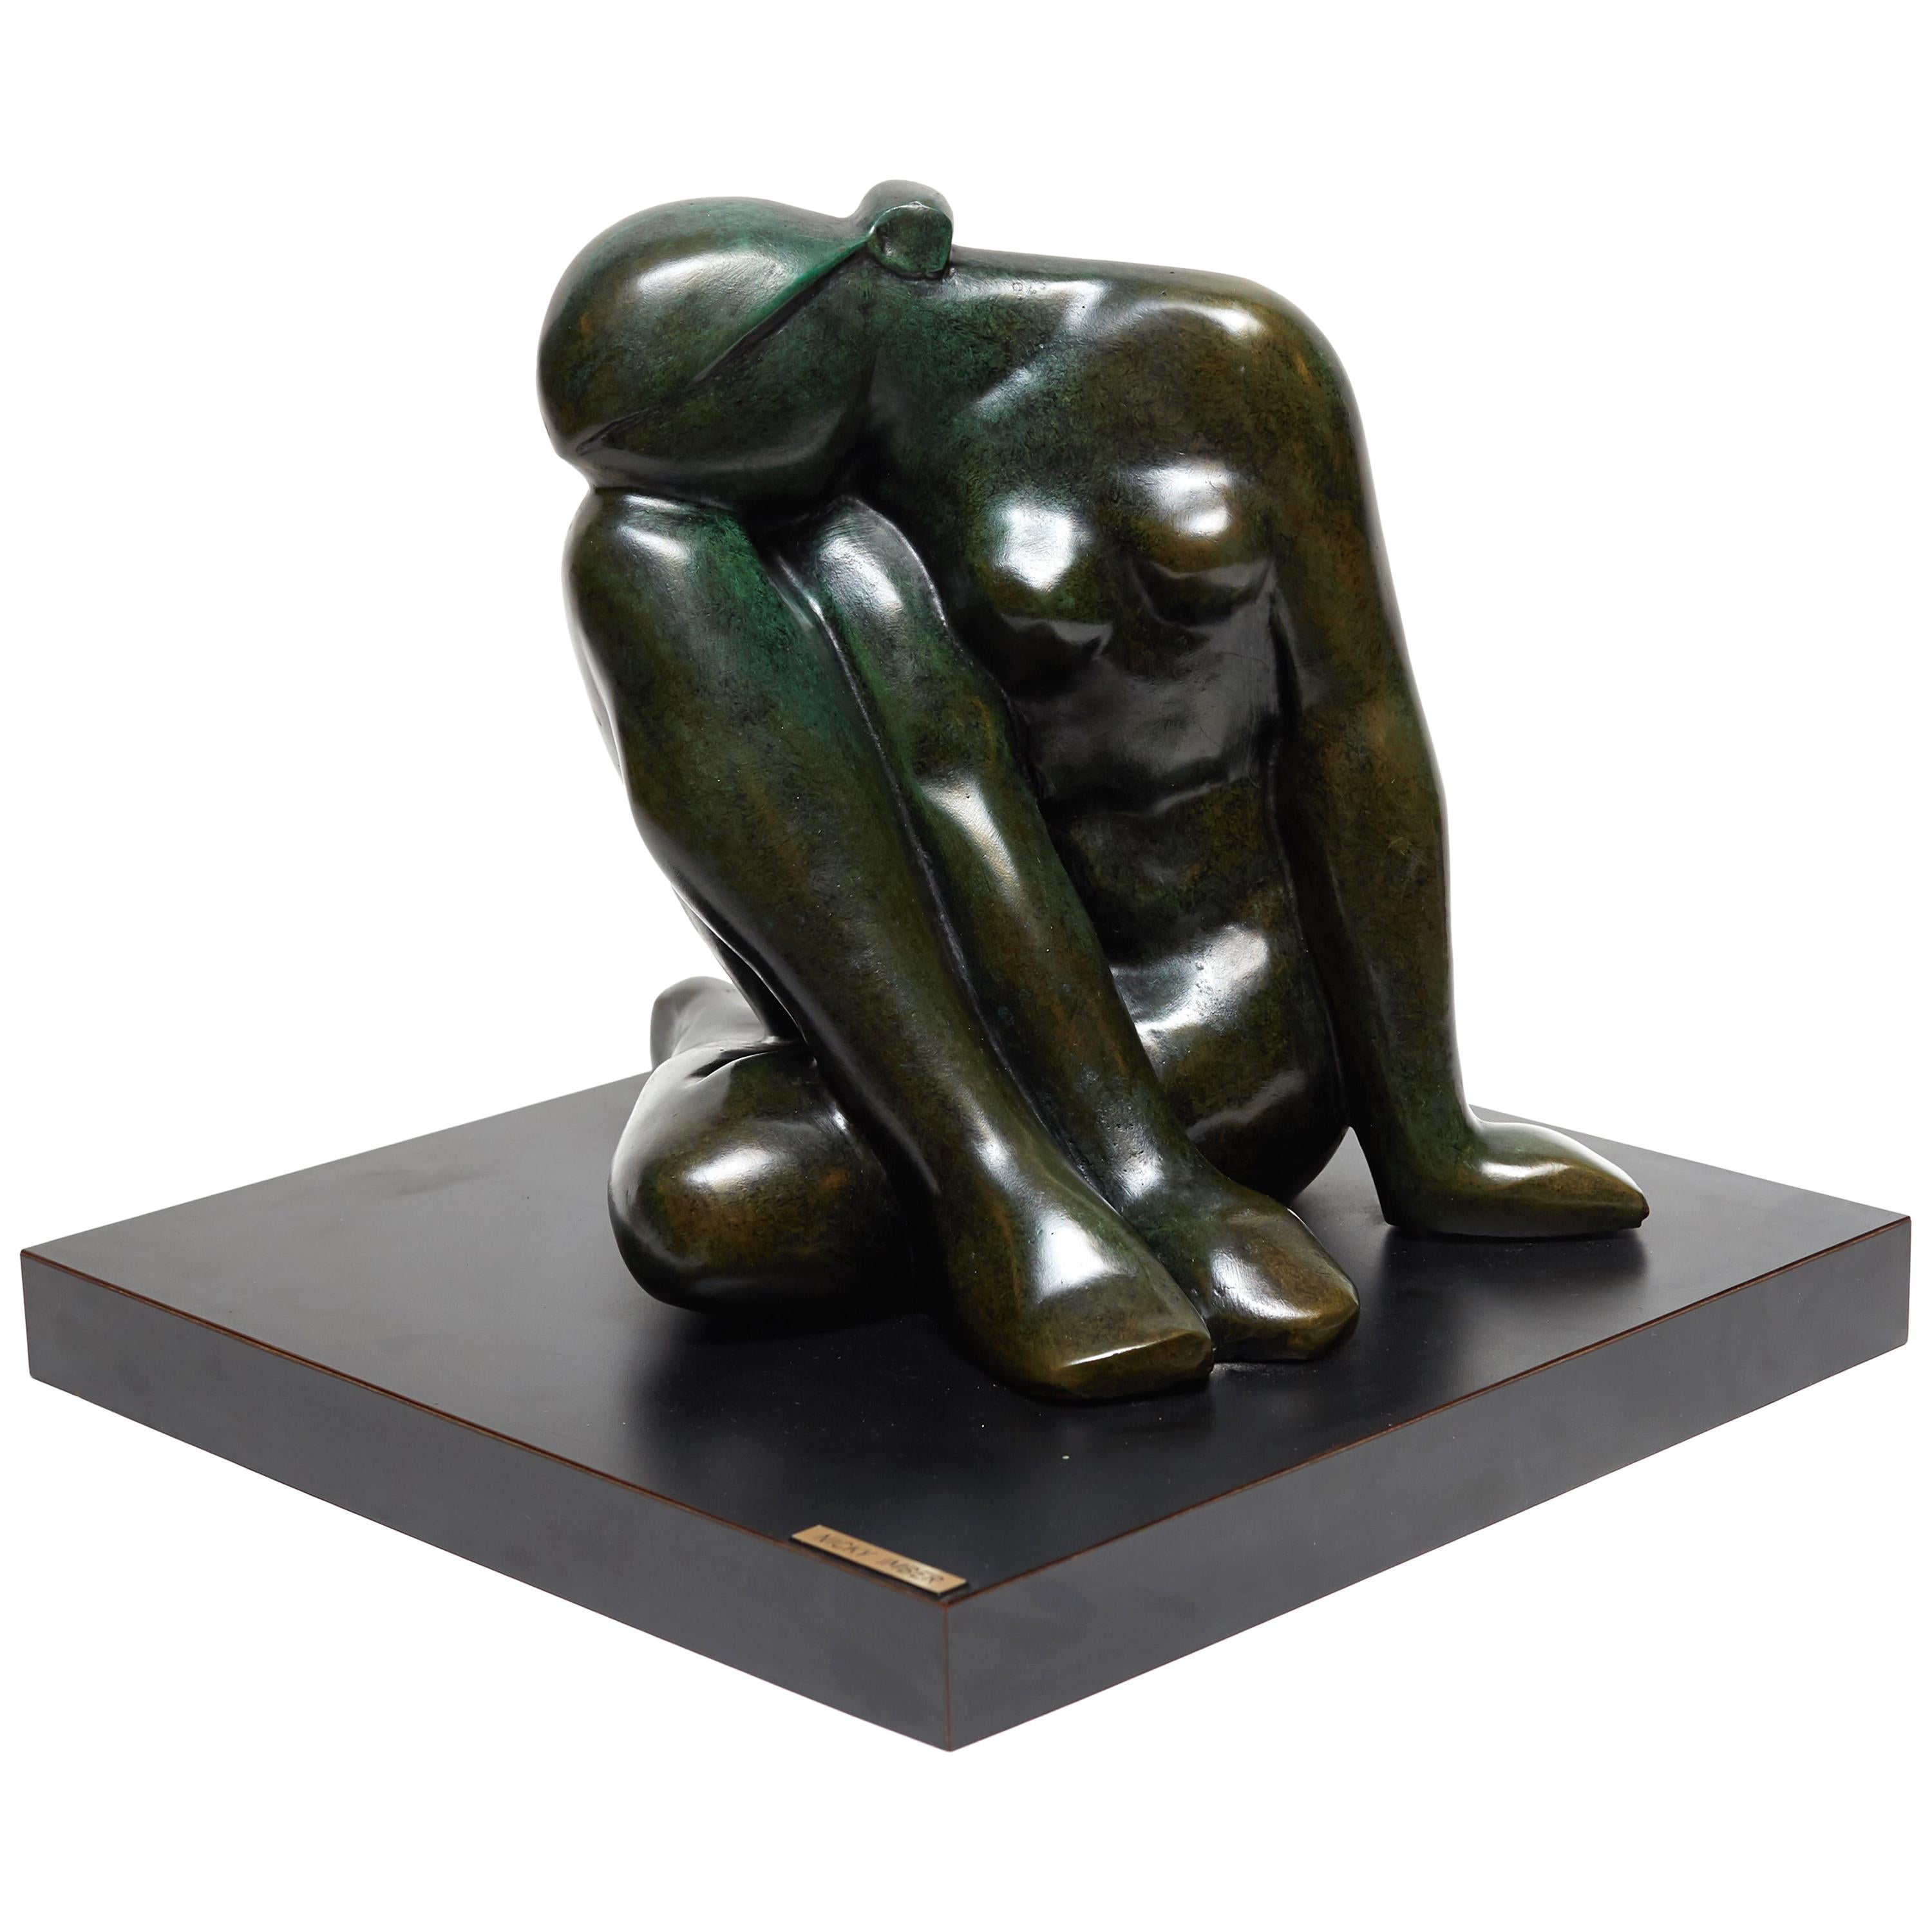 Patinated Bronze Figurative Female Sculpture by Nicky Imber, '1920-1996'